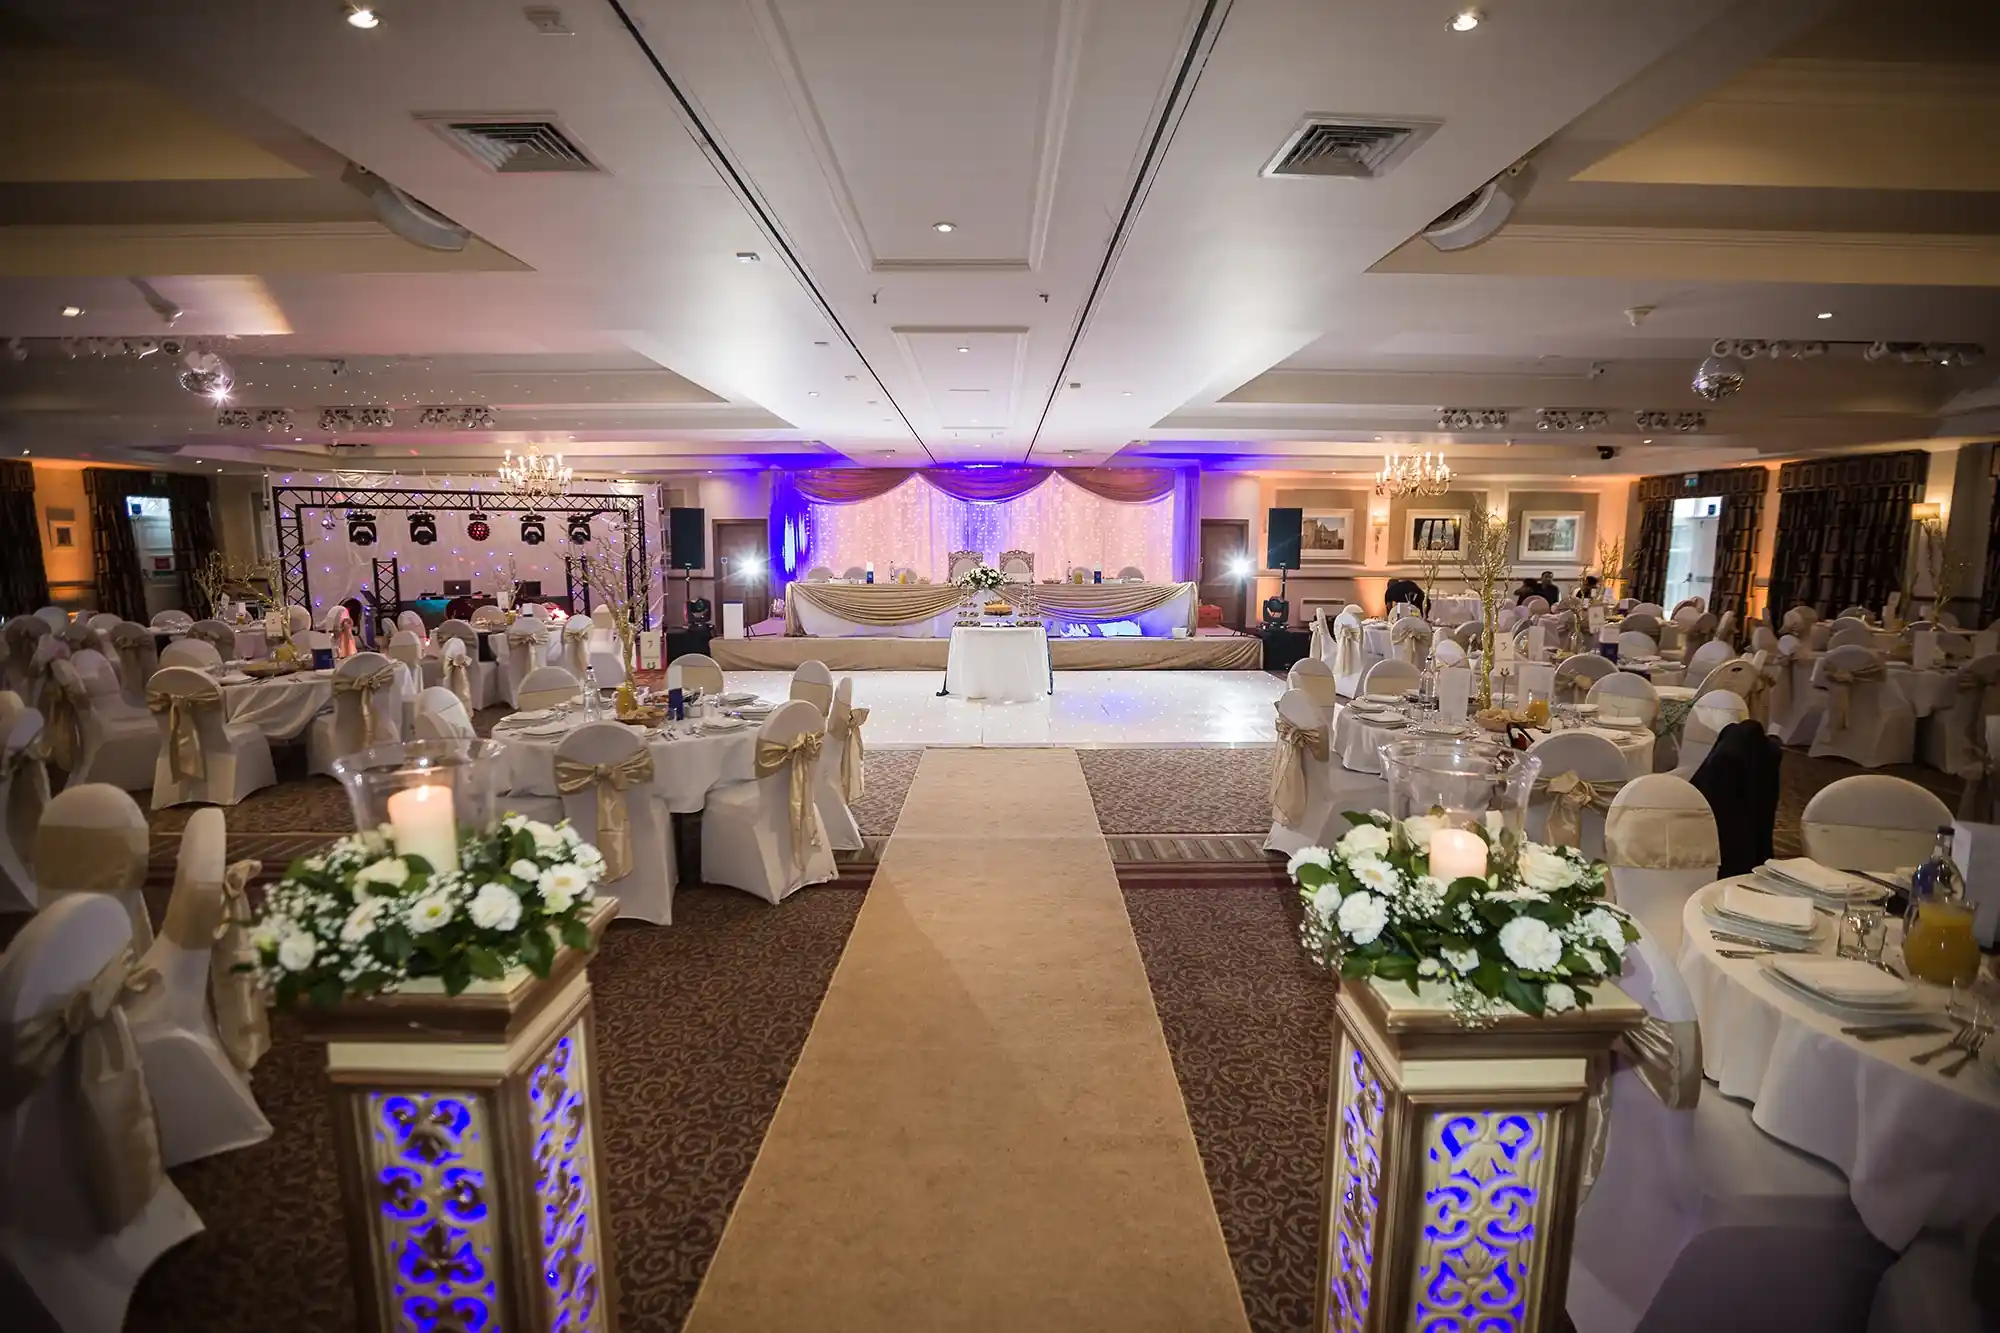 A well-lit wedding reception hall with round tables set with white linens, centered aisle leading to main table under purple lights.